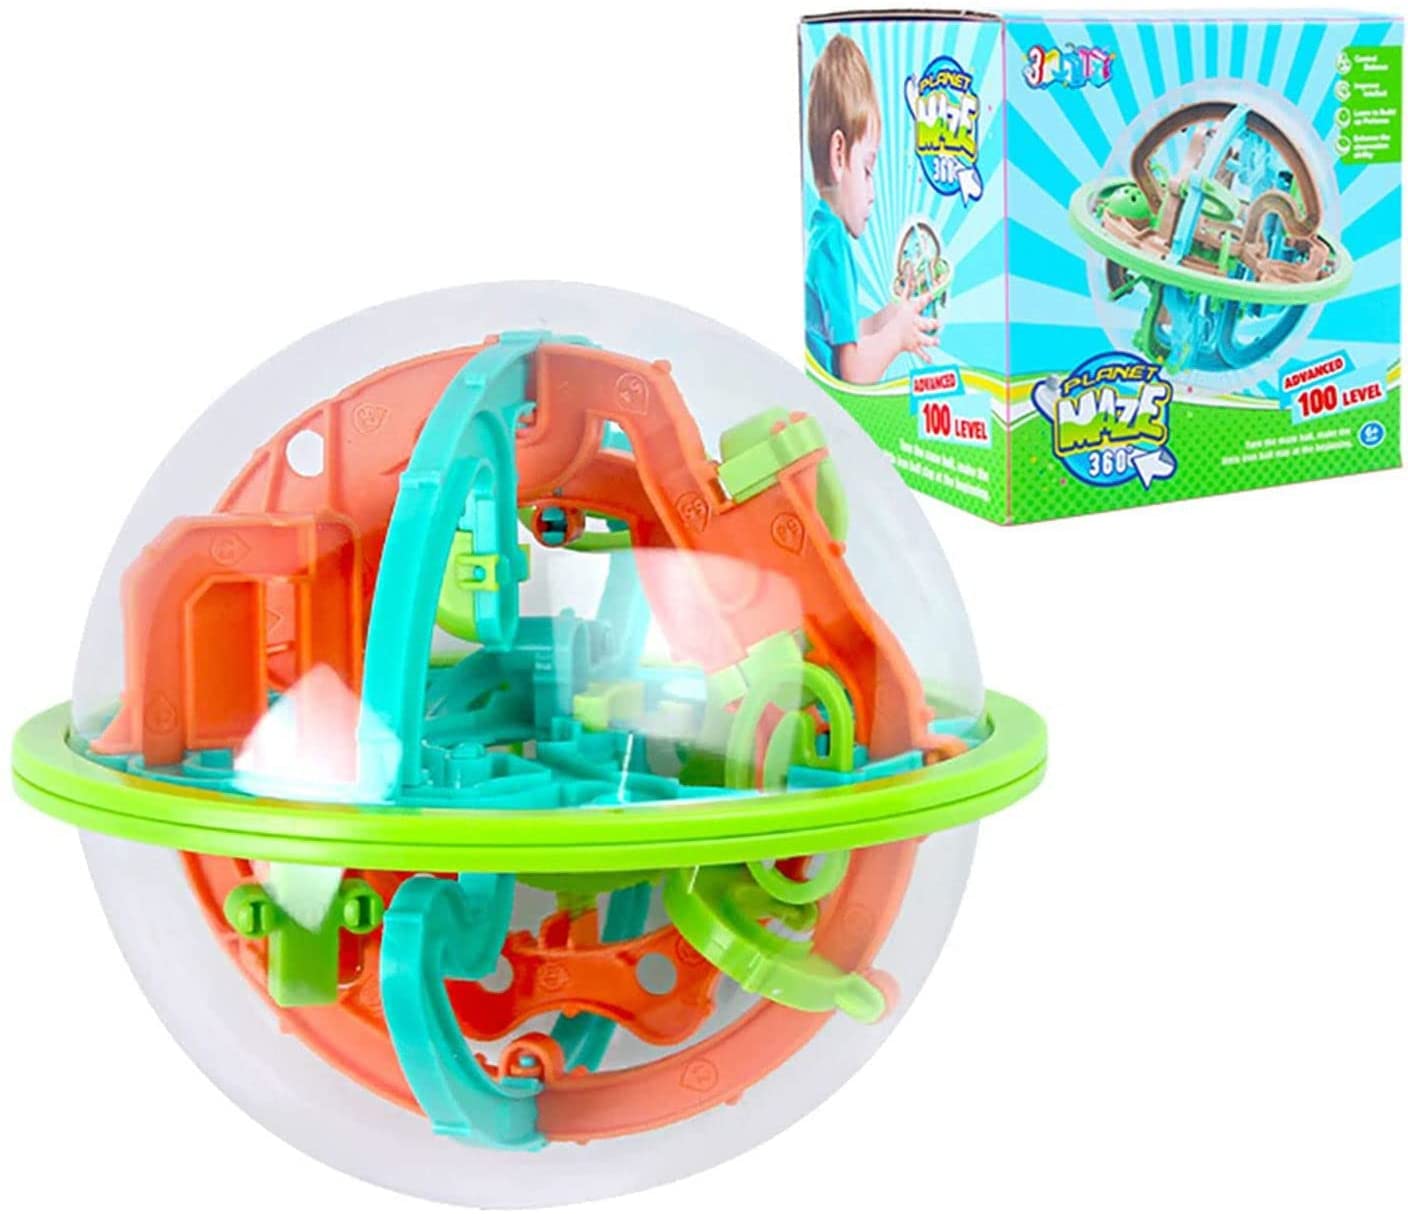 Latest 3D Maze Ball Magic Puzzle Toy 100 Barriers Labyrinth Puzzle Brain Teaser 